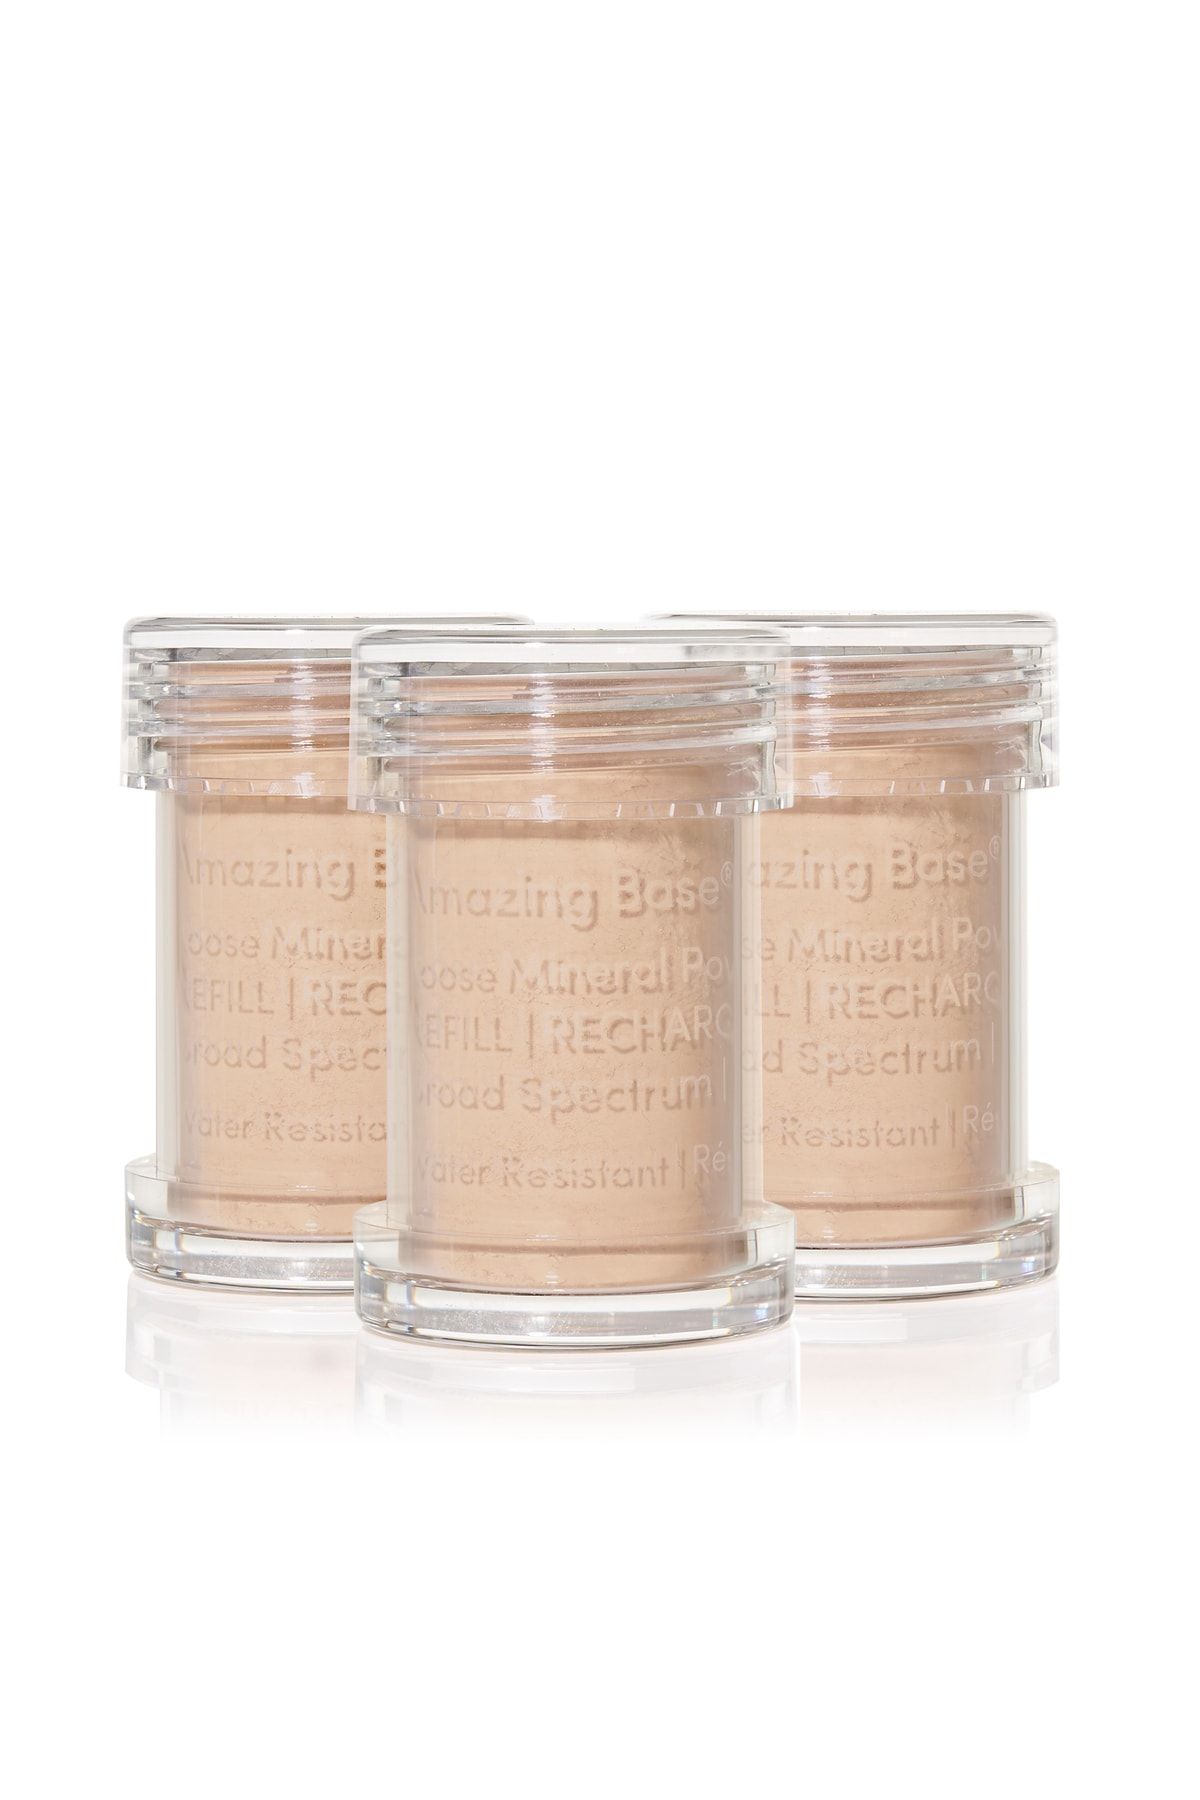 Jane Iredale Amazing Base® Loose Mineral Powder Refill Spf20 #natural ( 3 Refills )